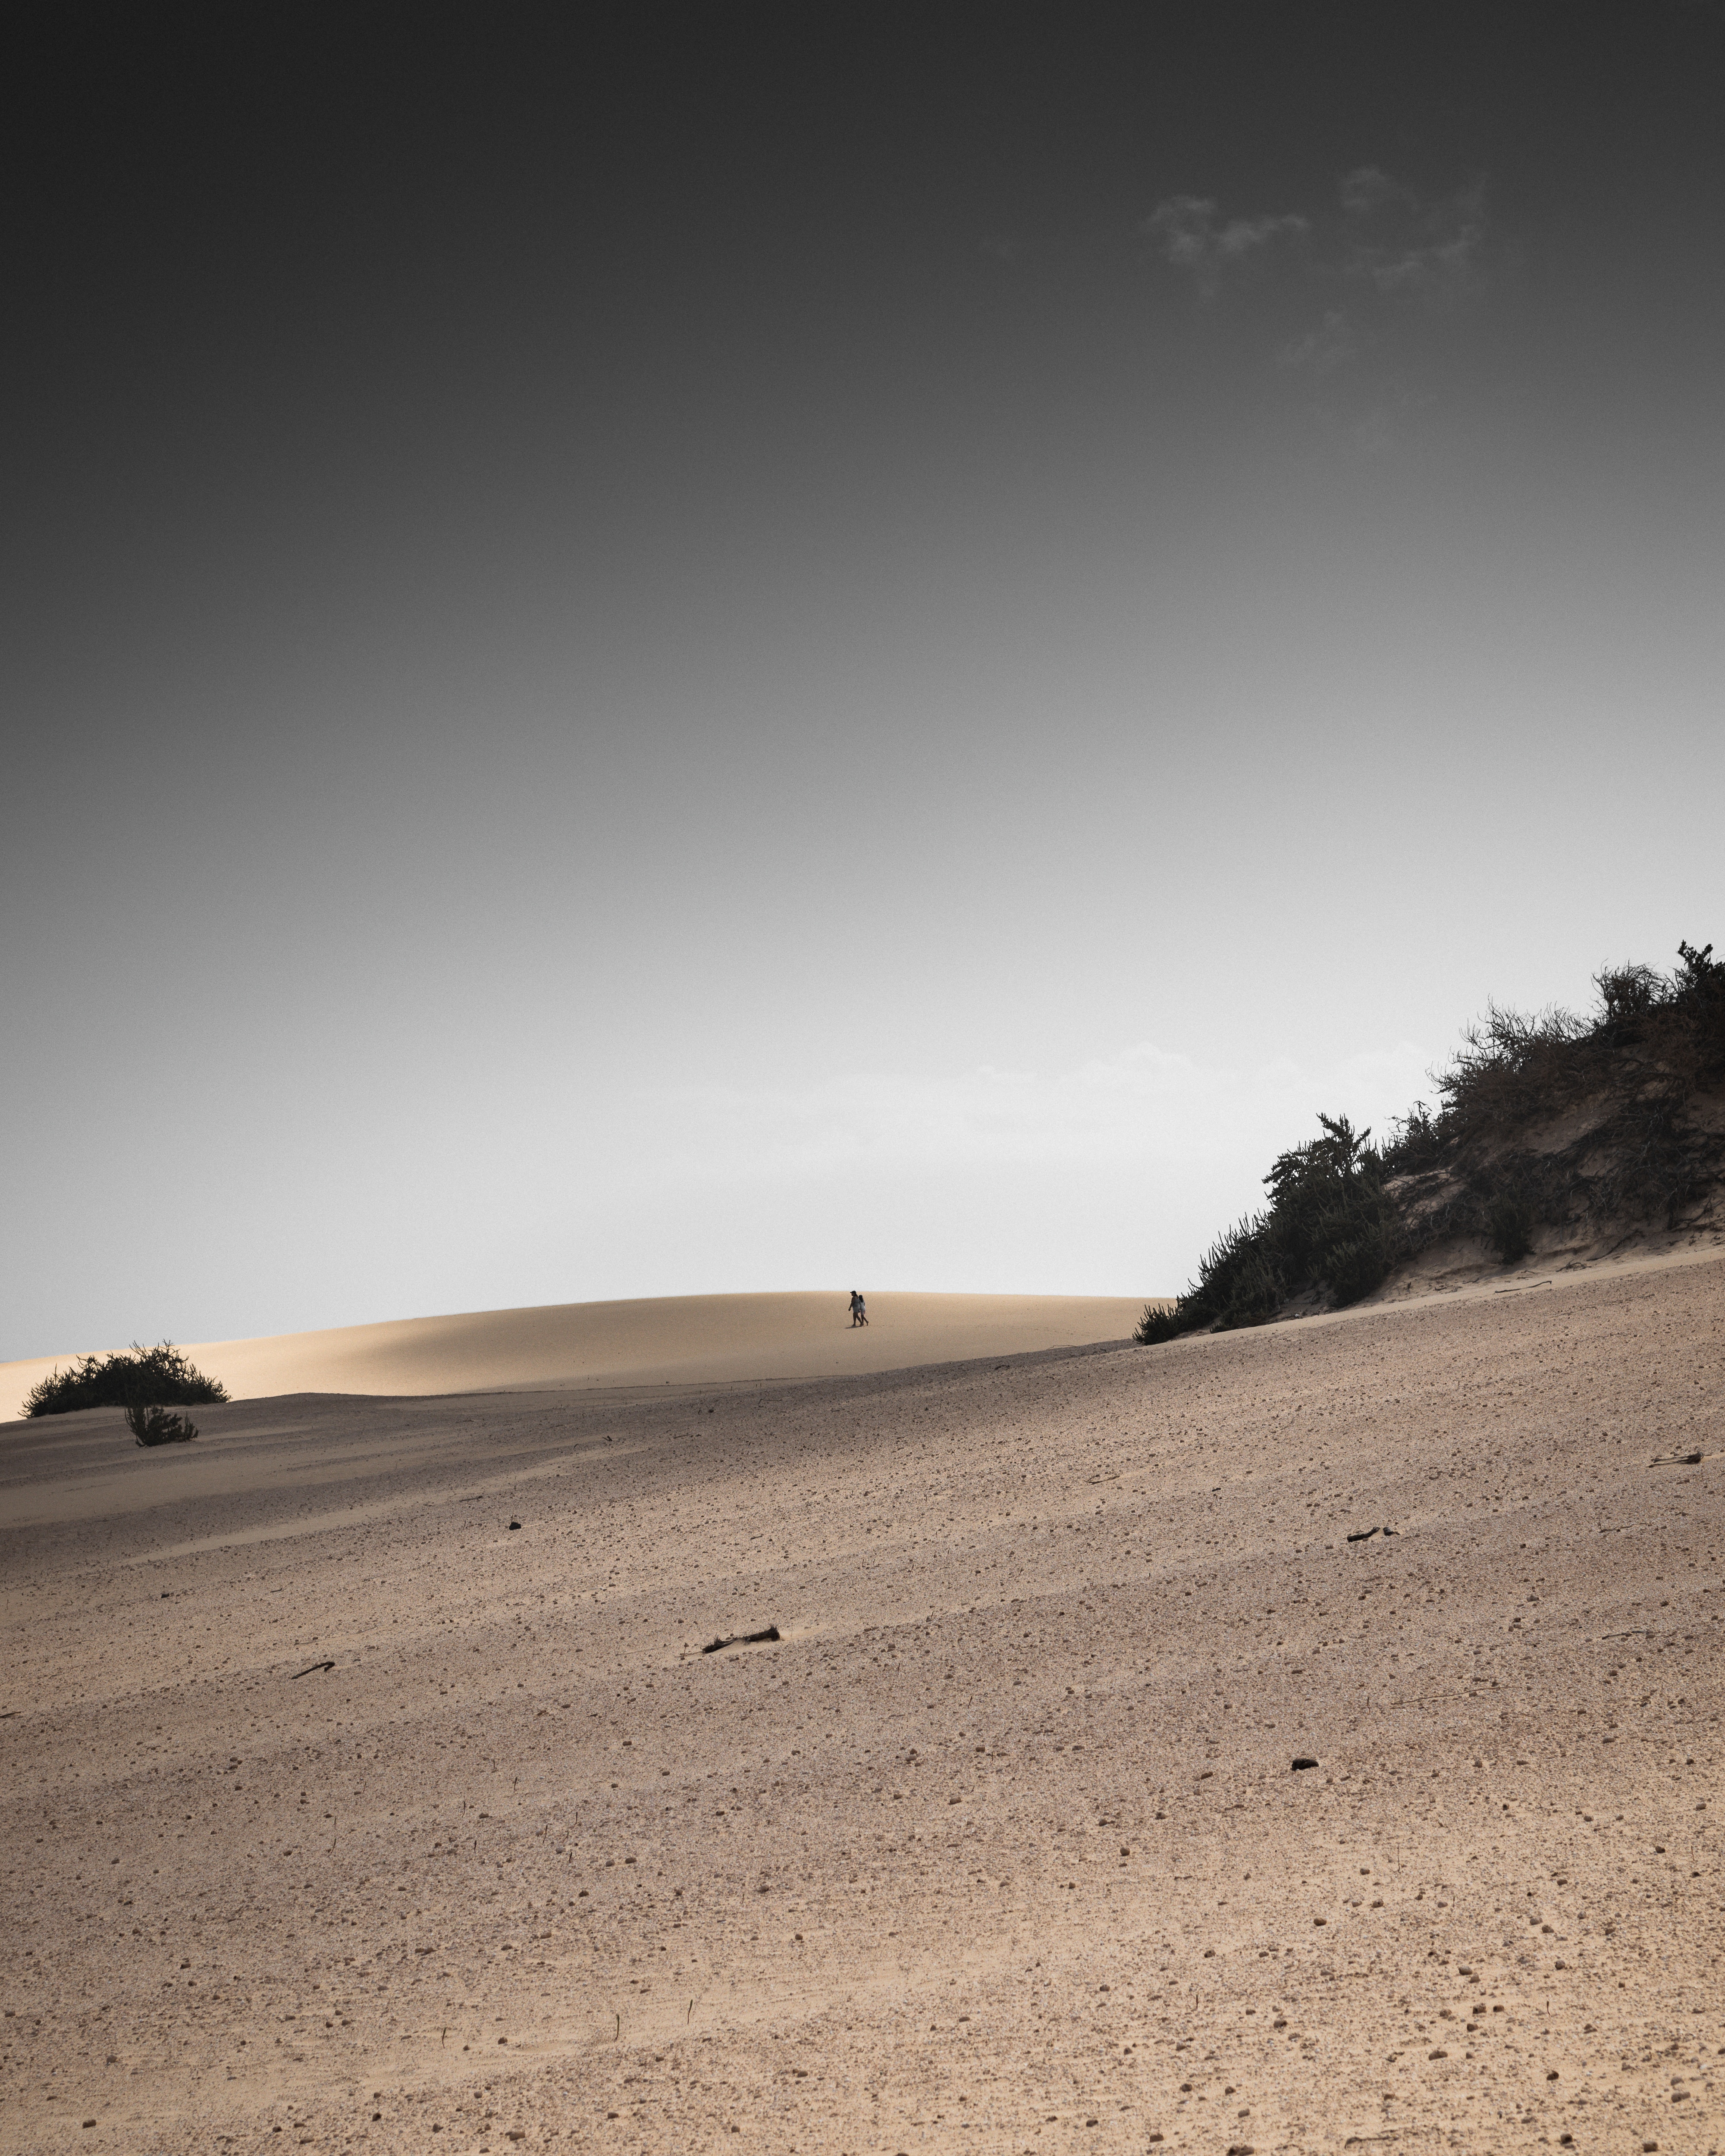 desert, landscape, nature, sand, silhouettes, hilly cellphone